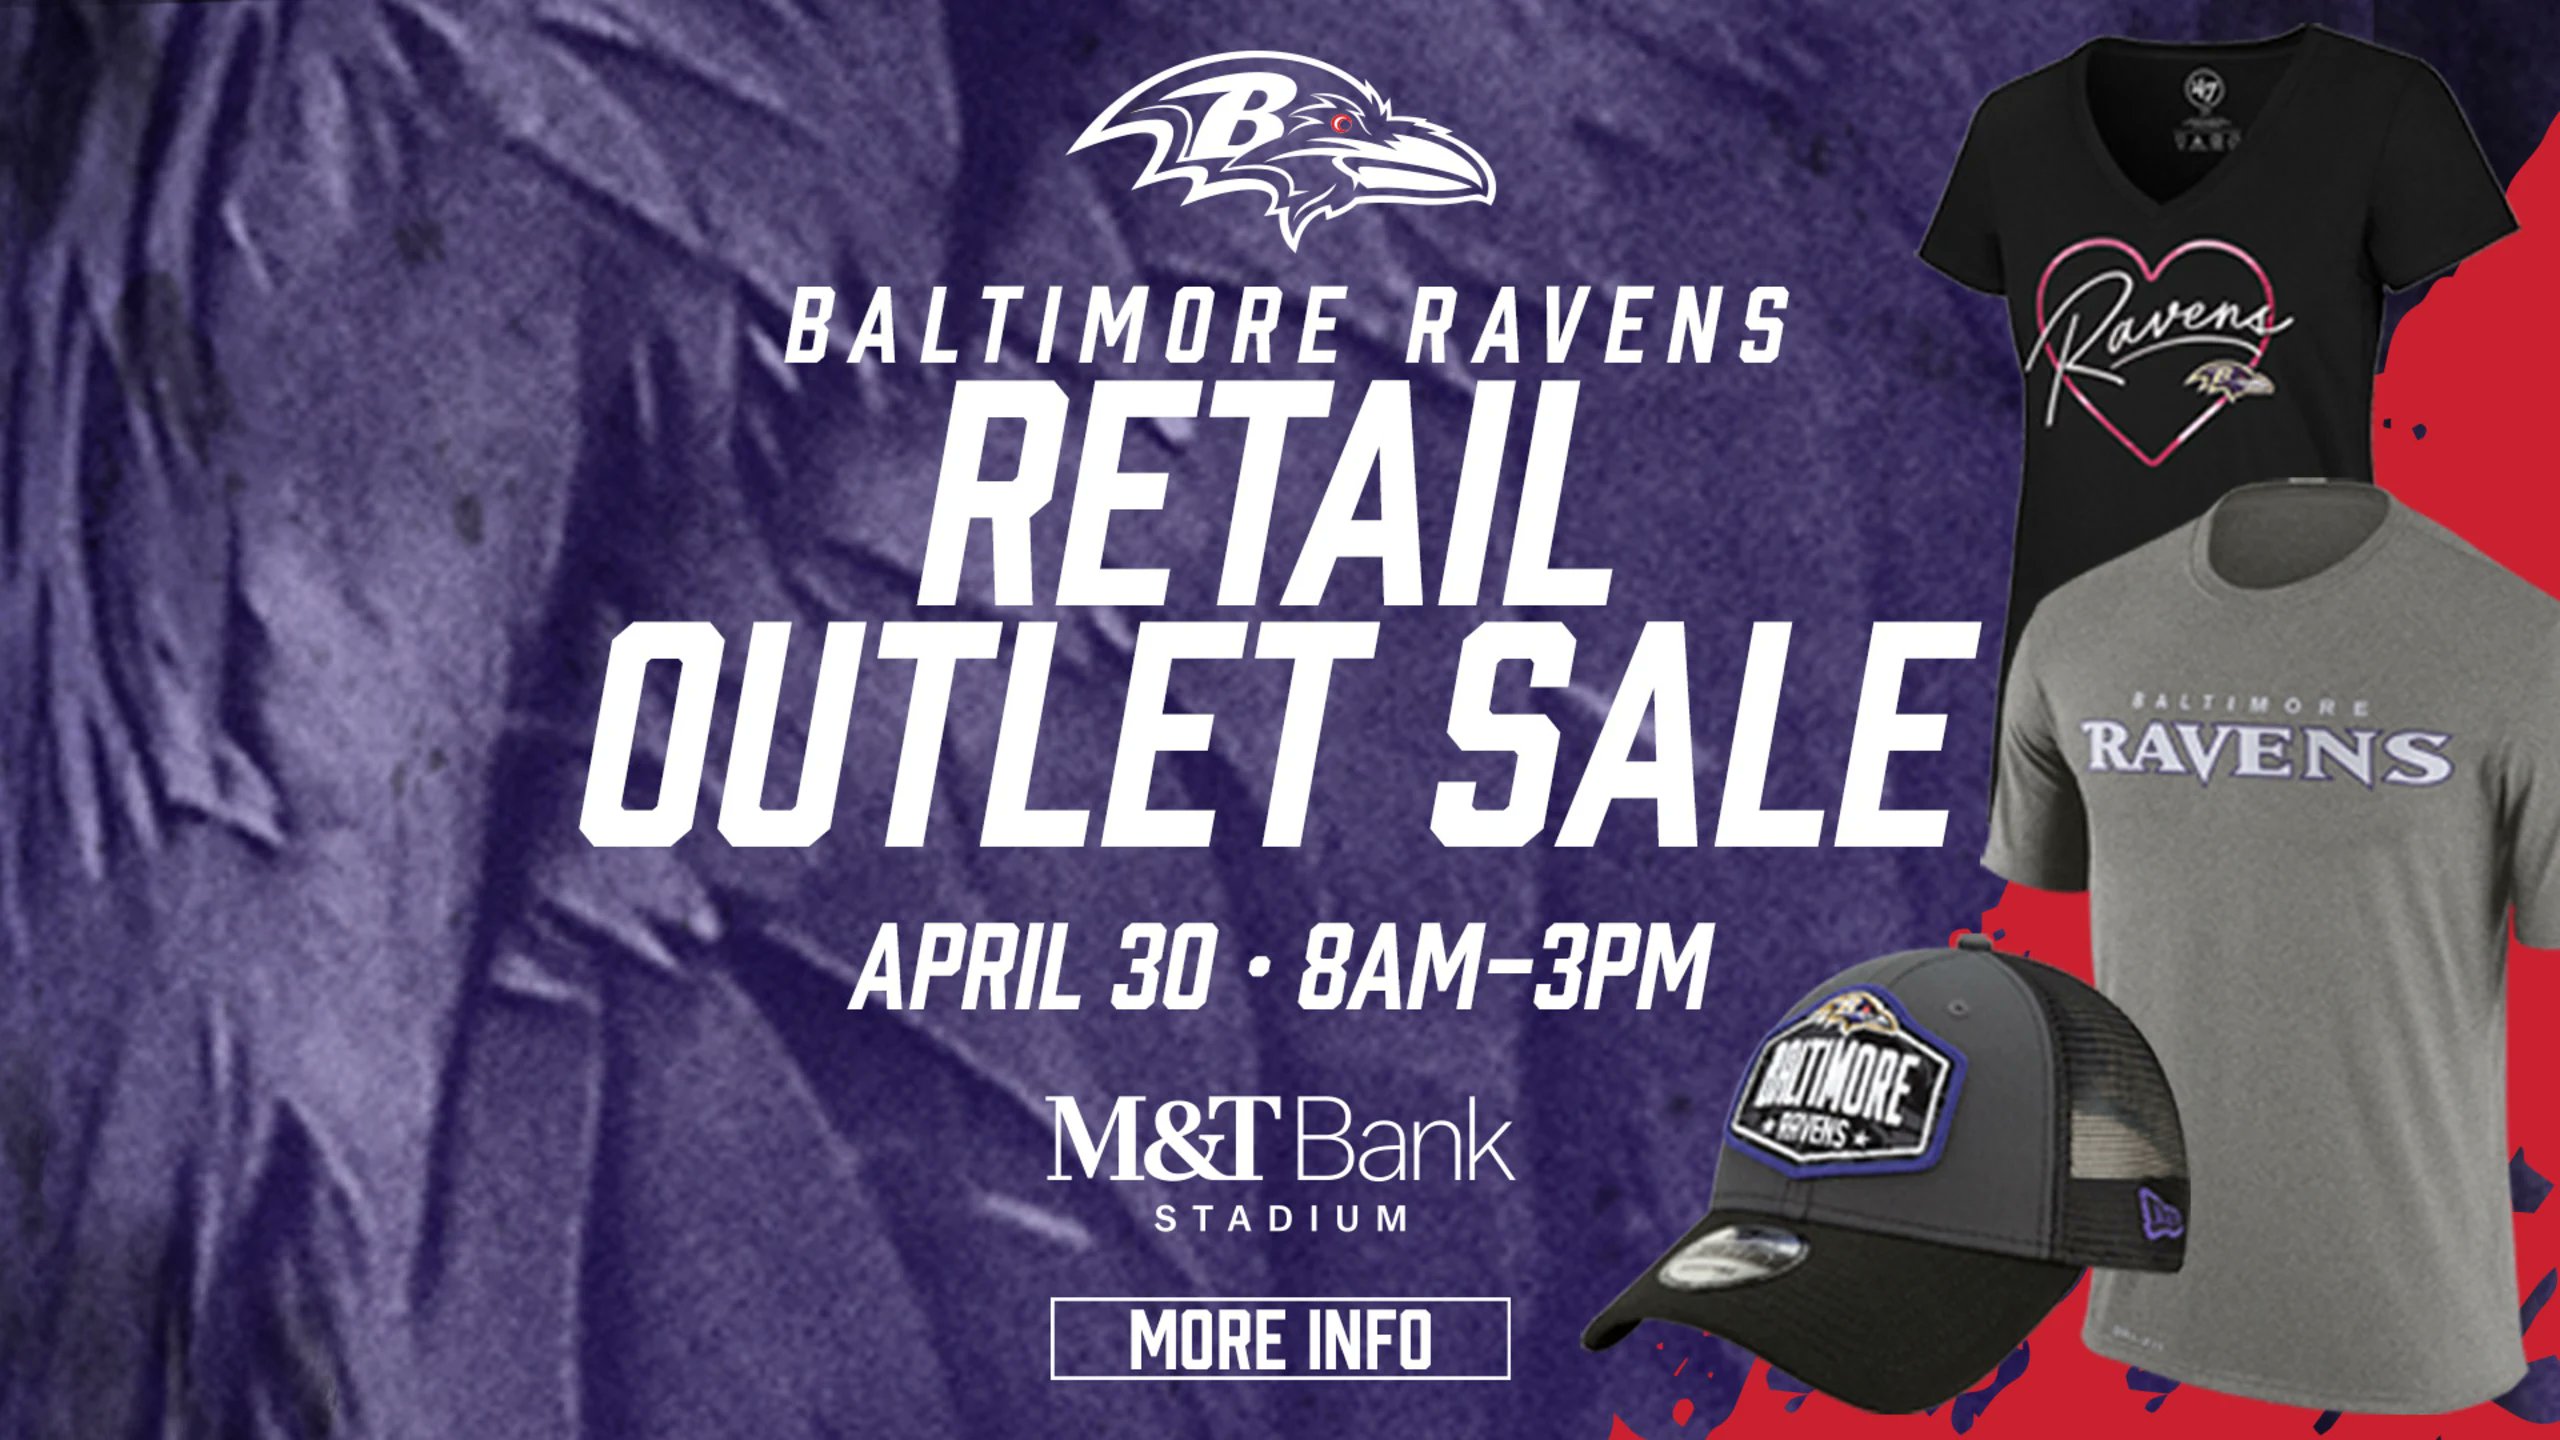 Baltimore Ravens on X: 'Our Retail Outlet Sale is at M&T Bank